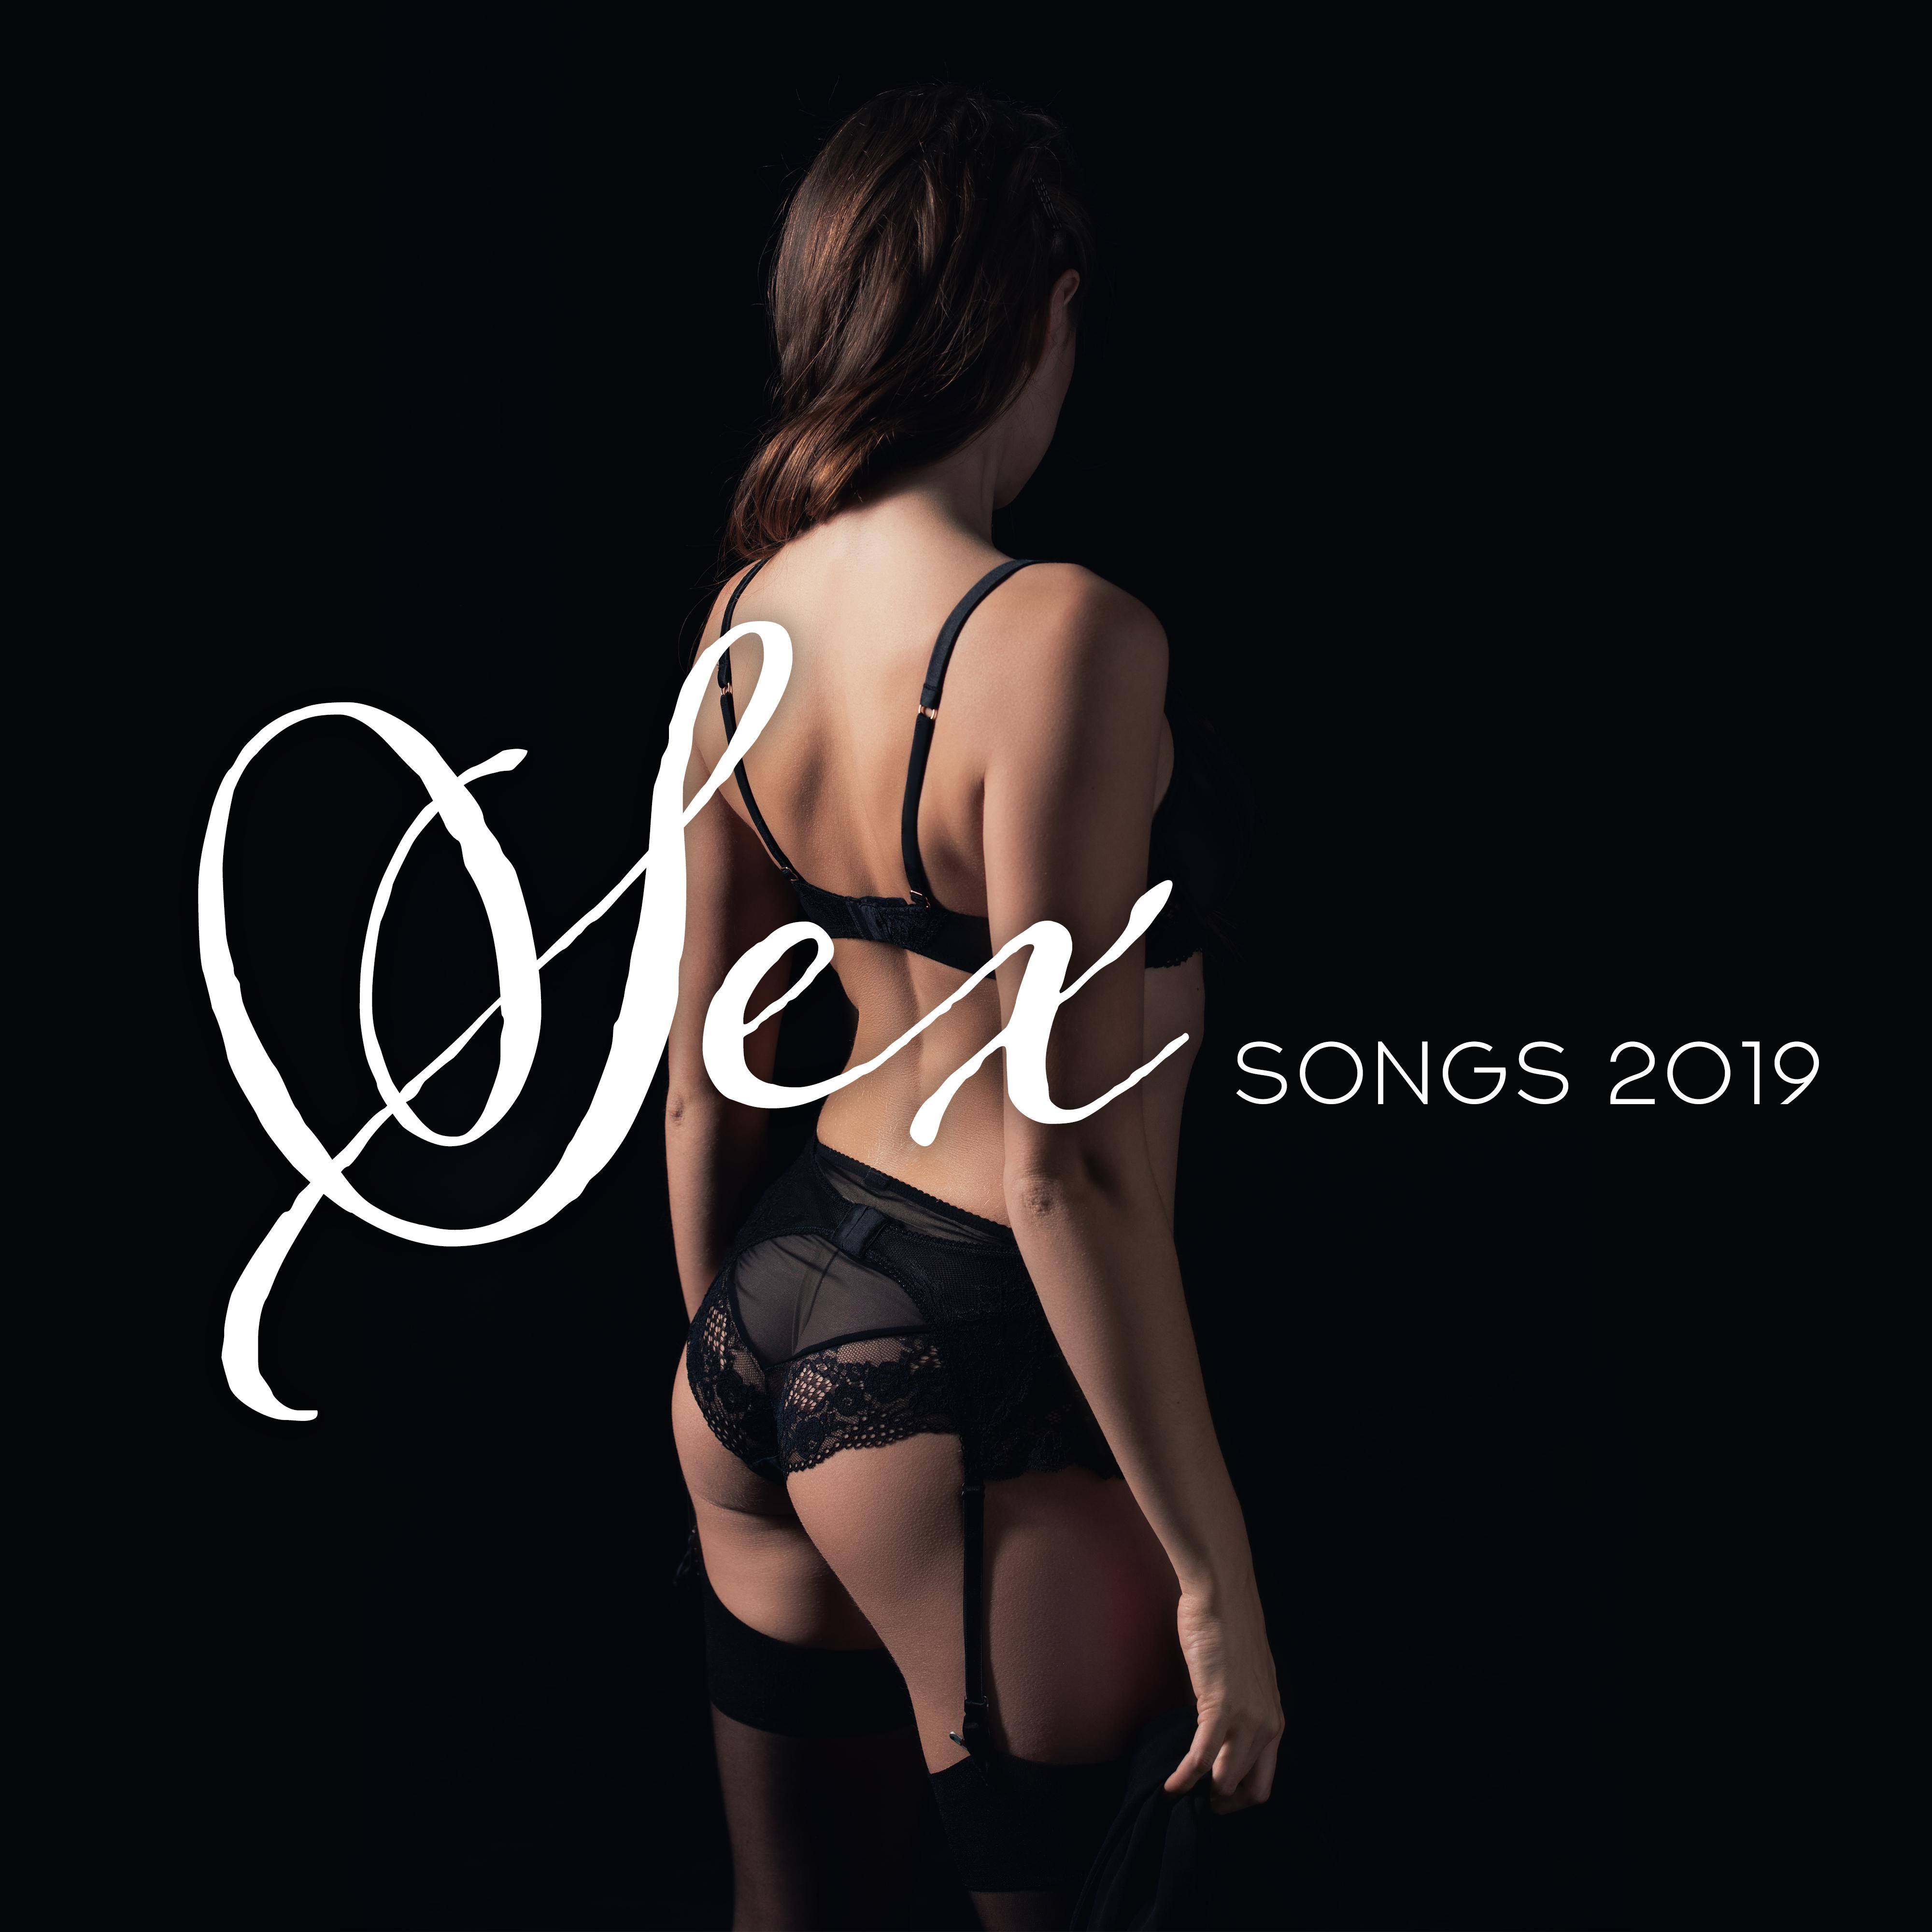 Sex Songs 2019: Chill Out 2019 for Tantric Sex & Making Love